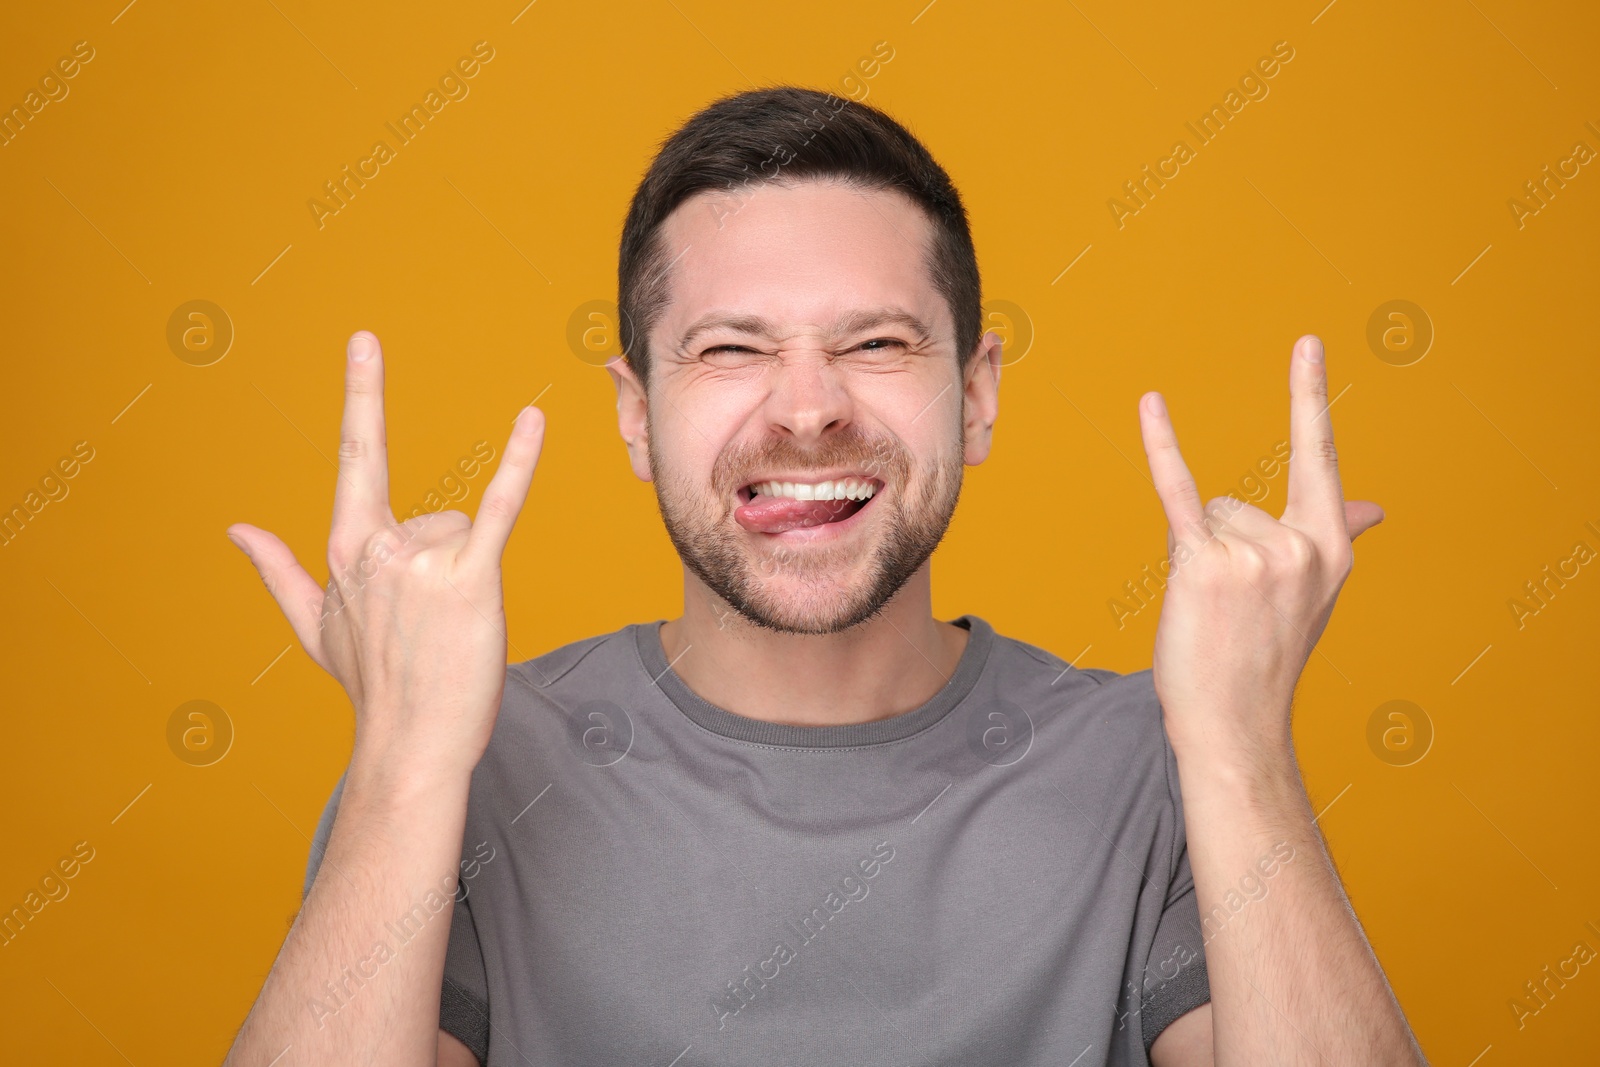 Photo of Happy man showing his tongue and rock gesture on orange background